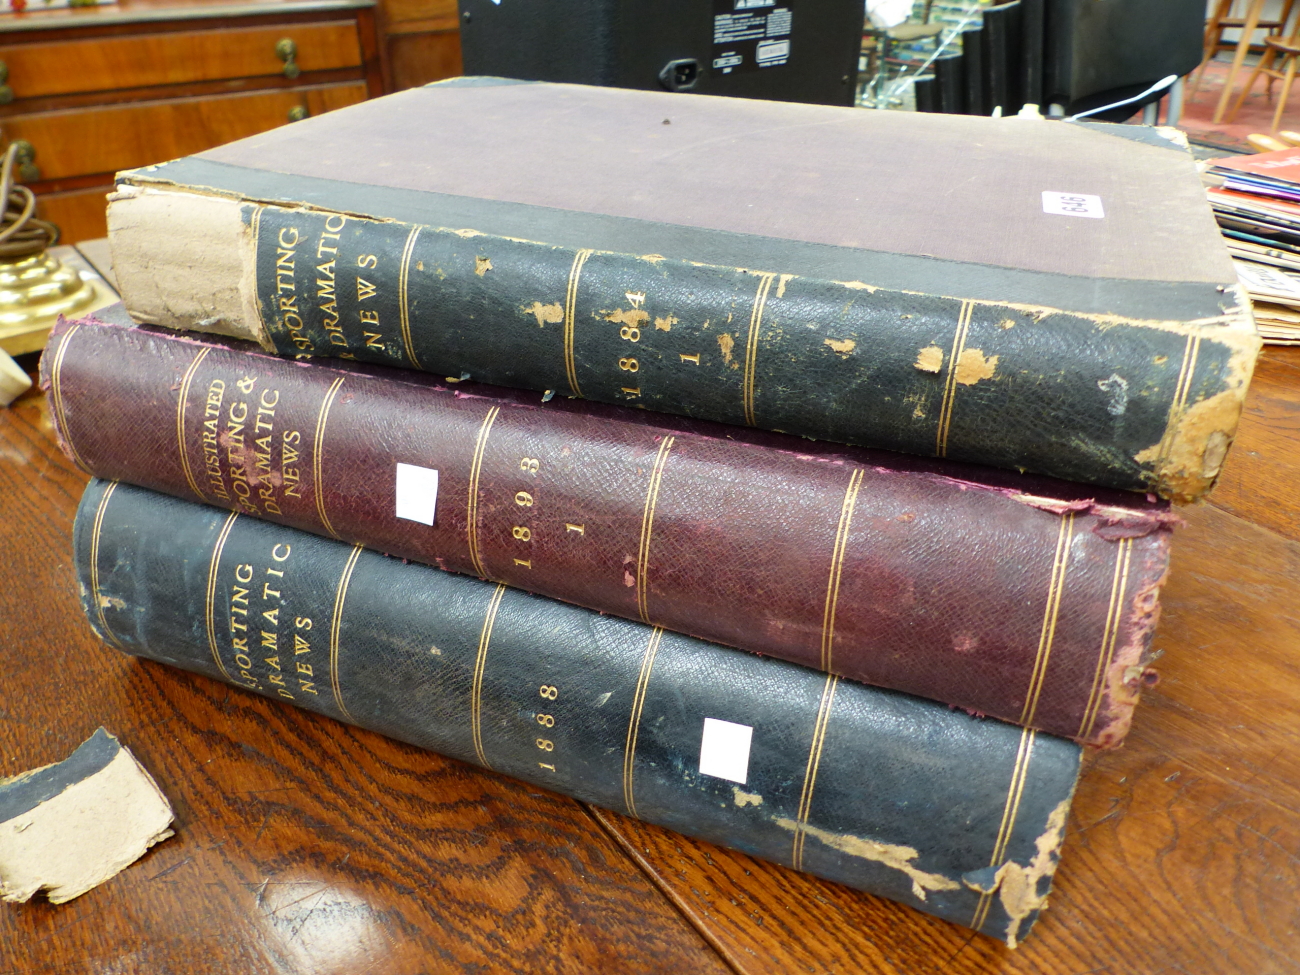 THREE BOUND ANNUALS OF THE ILLUSTRATED SPORTING AND DRAMATIC NEWS. 1884, 1888, AND 1893.